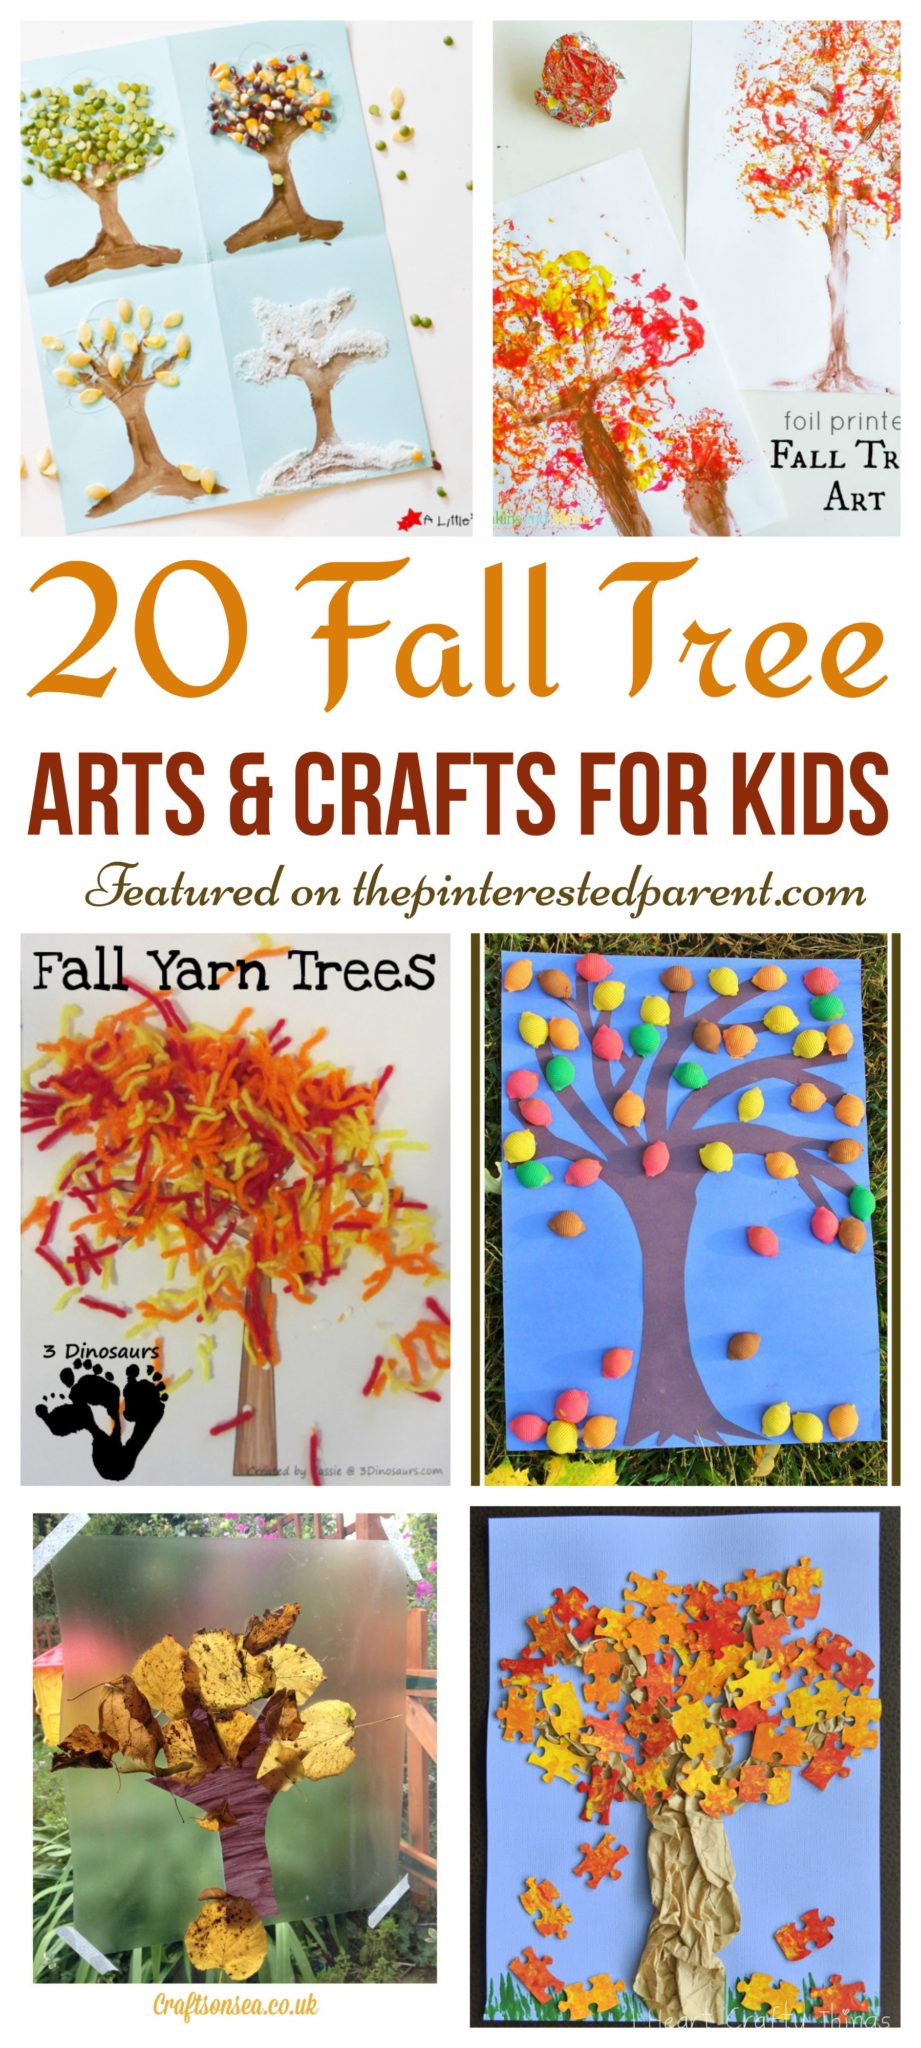 Preschoolers Arts And Crafts Ideas
 20 Fall Tree Arts & Crafts Ideas For Kids – The